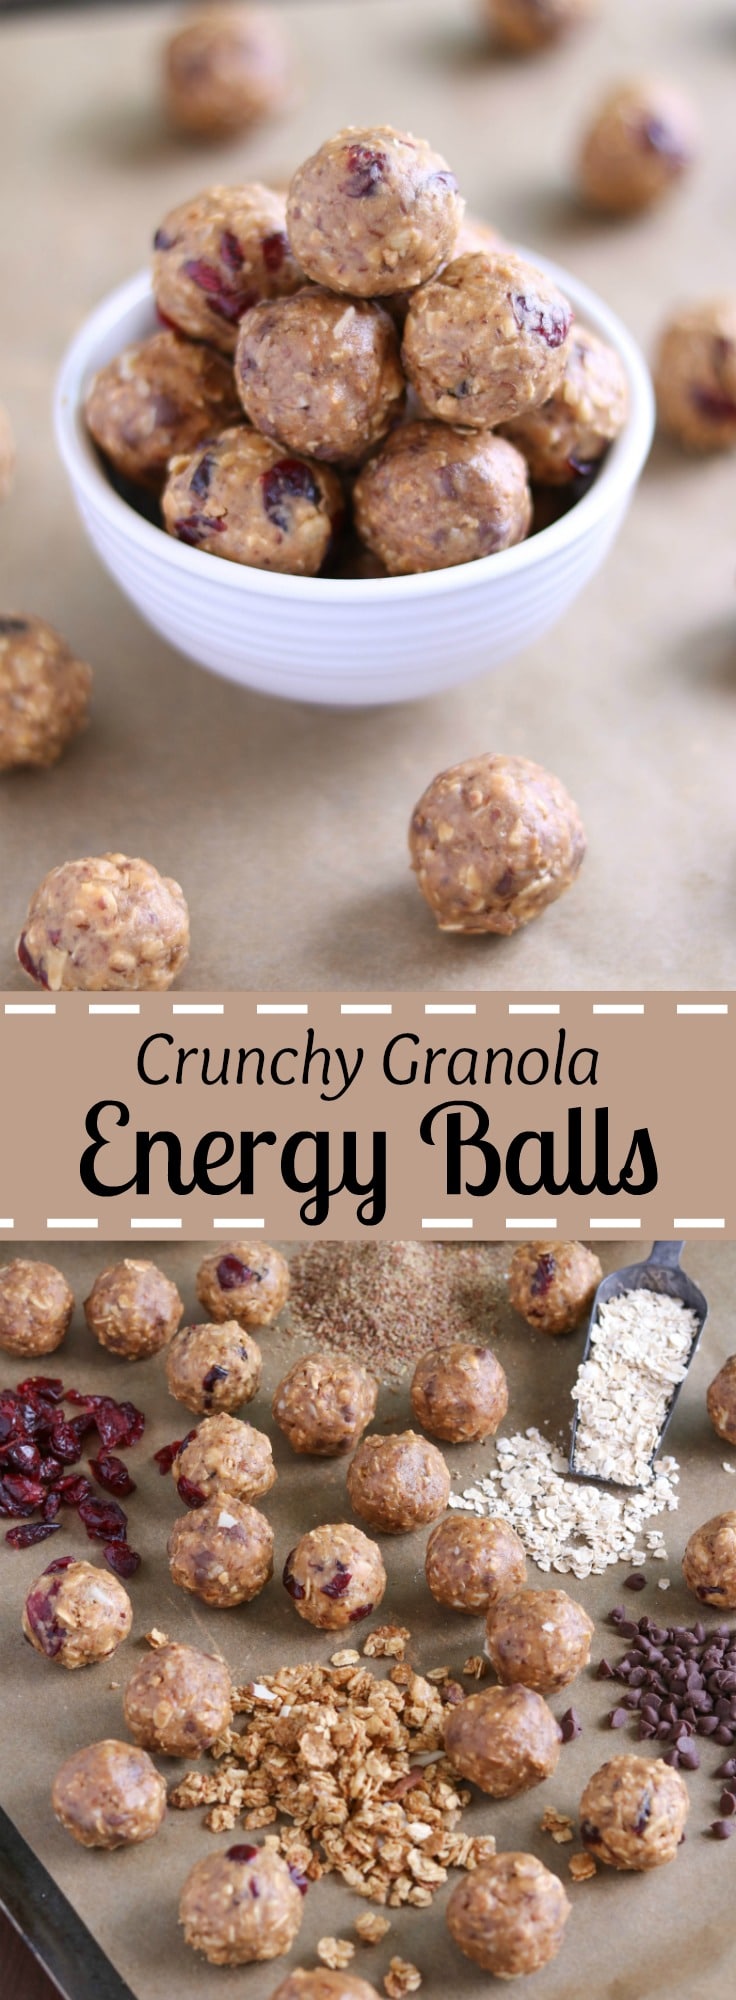 Freezable, no-bake Energy Balls with protein and whole grains! These Crunchy Granola Snack Bites will keep you satisfyingly full and power you through whatever the day might hold. A perfect healthy snack recipe, or a grab-and-go, make-ahead breakfast recipe! With peanut butter, oats, flax, and granola, plus dried fruit or chocolate chips - these energy bites are crunchy, chewy, and delicious! A healthy recipe with a few simple ingredients you probably have on hand! | www.TwoHealthyKitchens.com